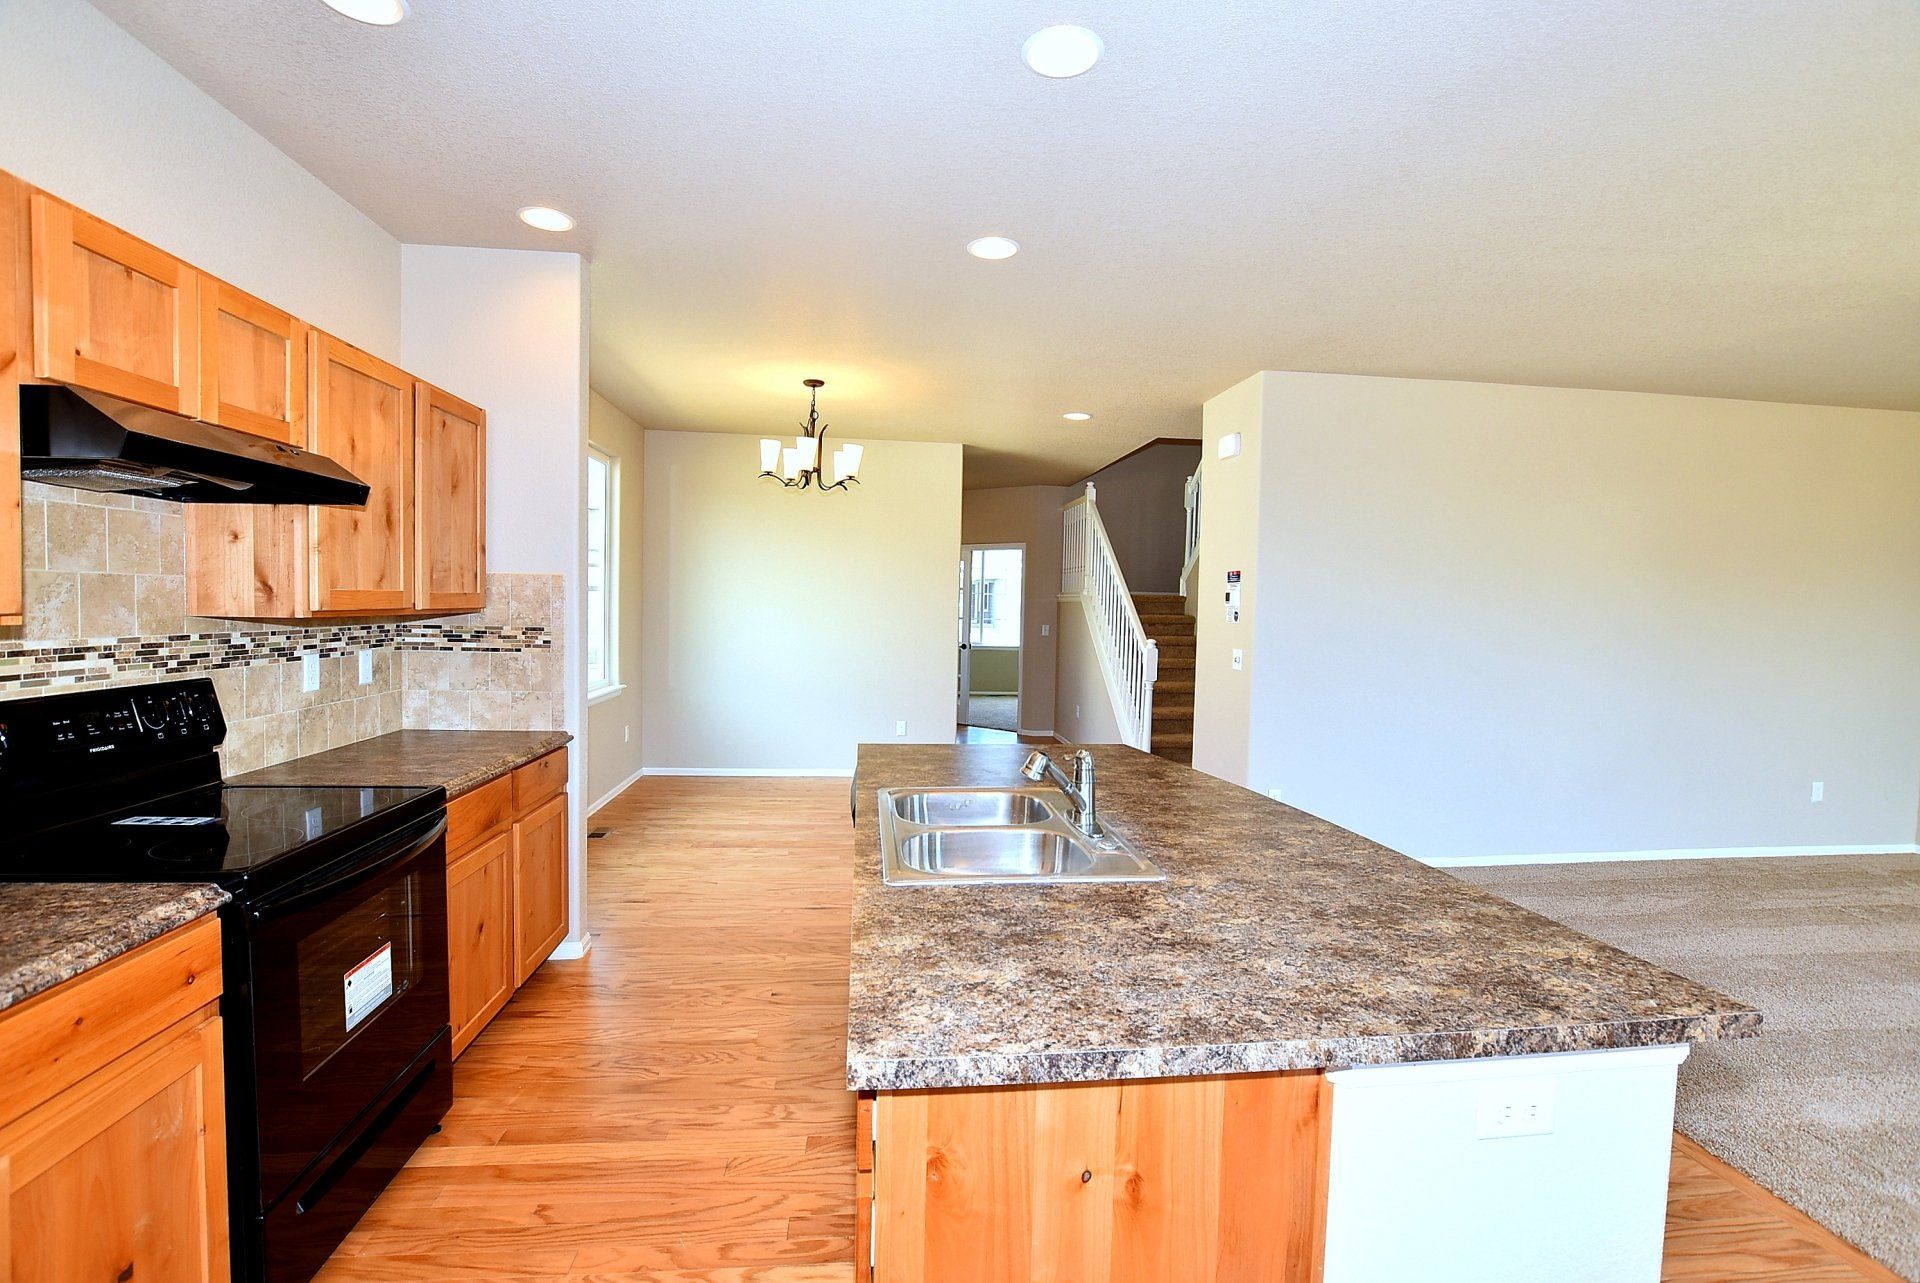 Kitchen and countertops